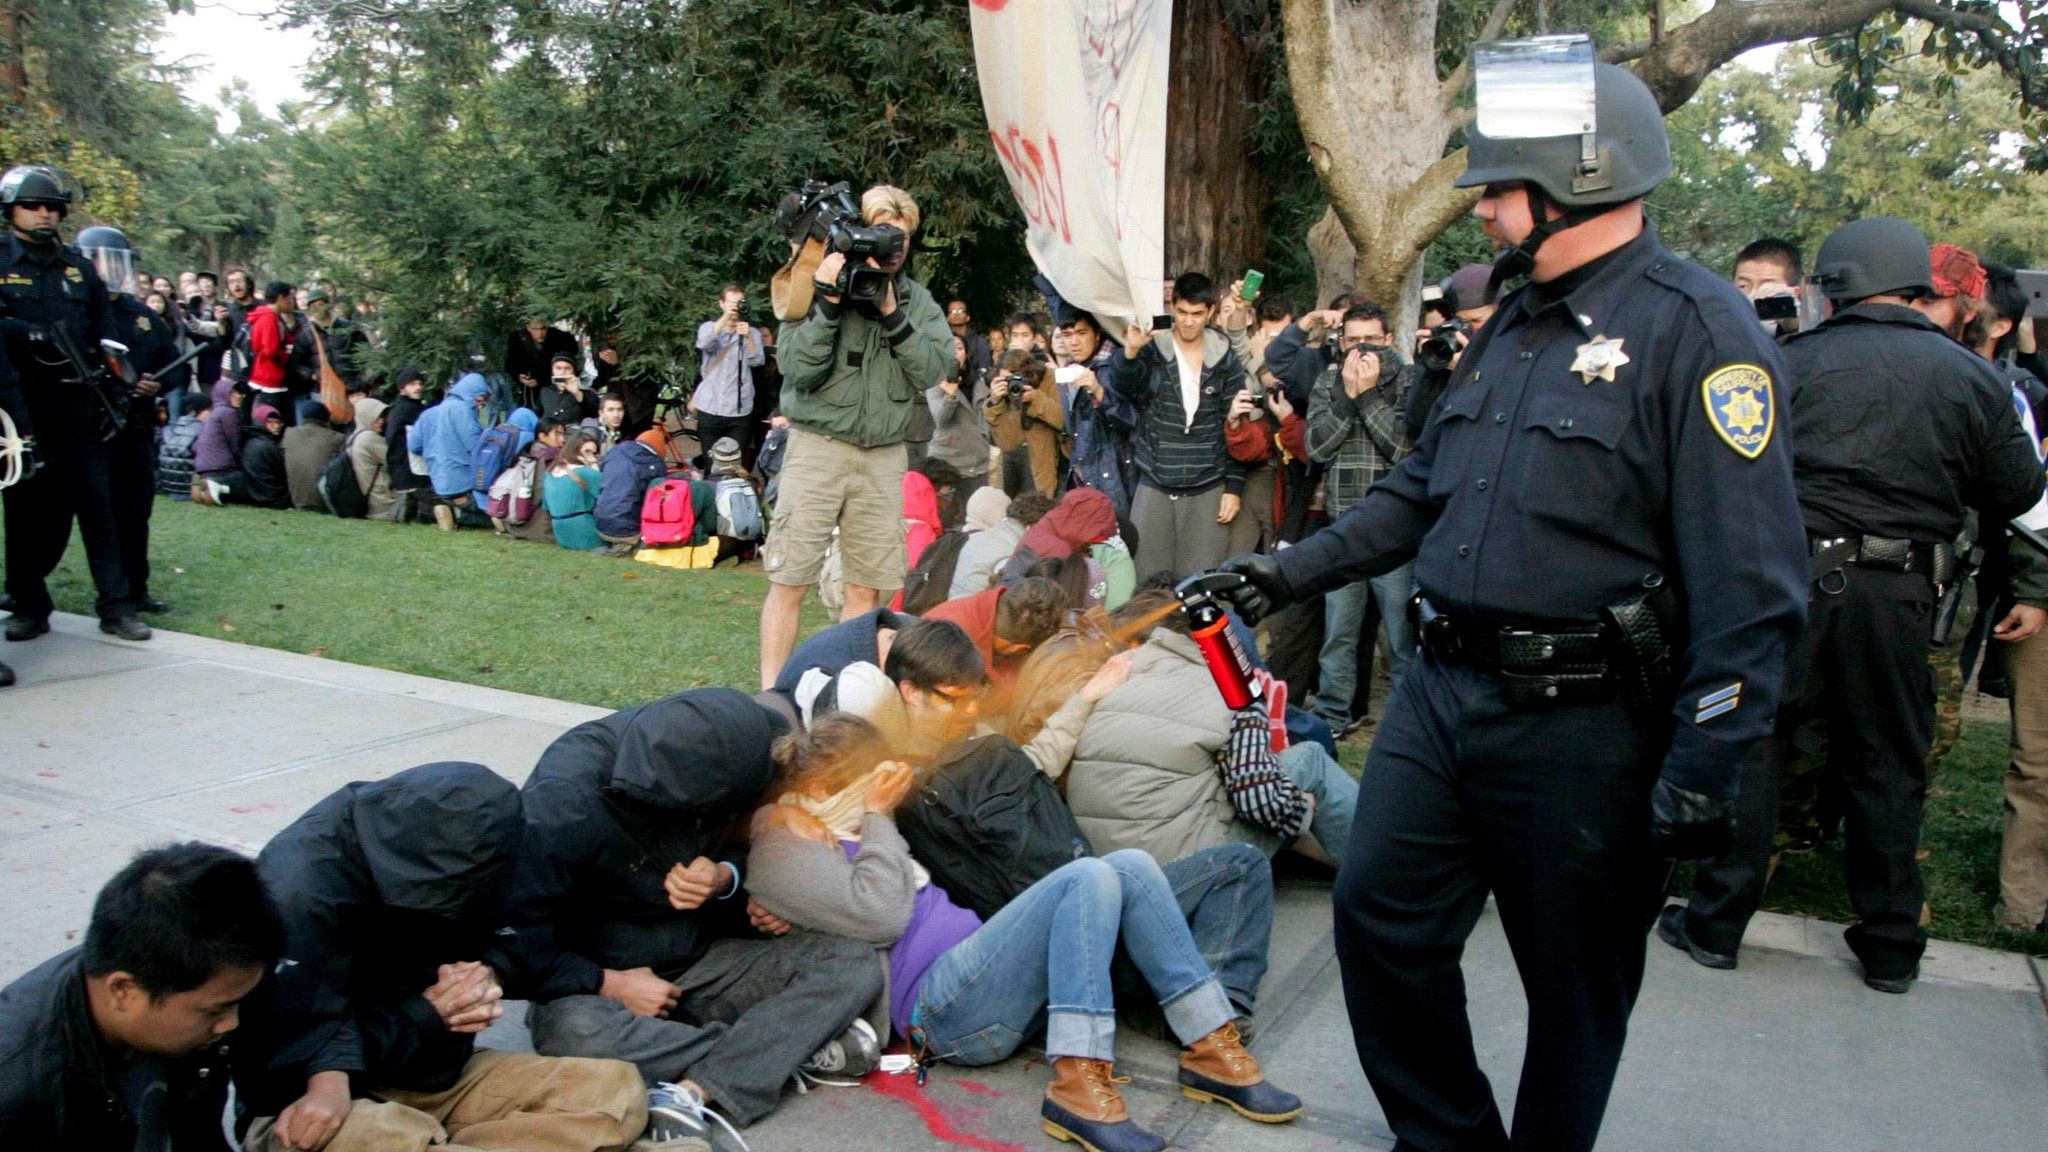 Students at UC Davis are sprayed with pepper spray